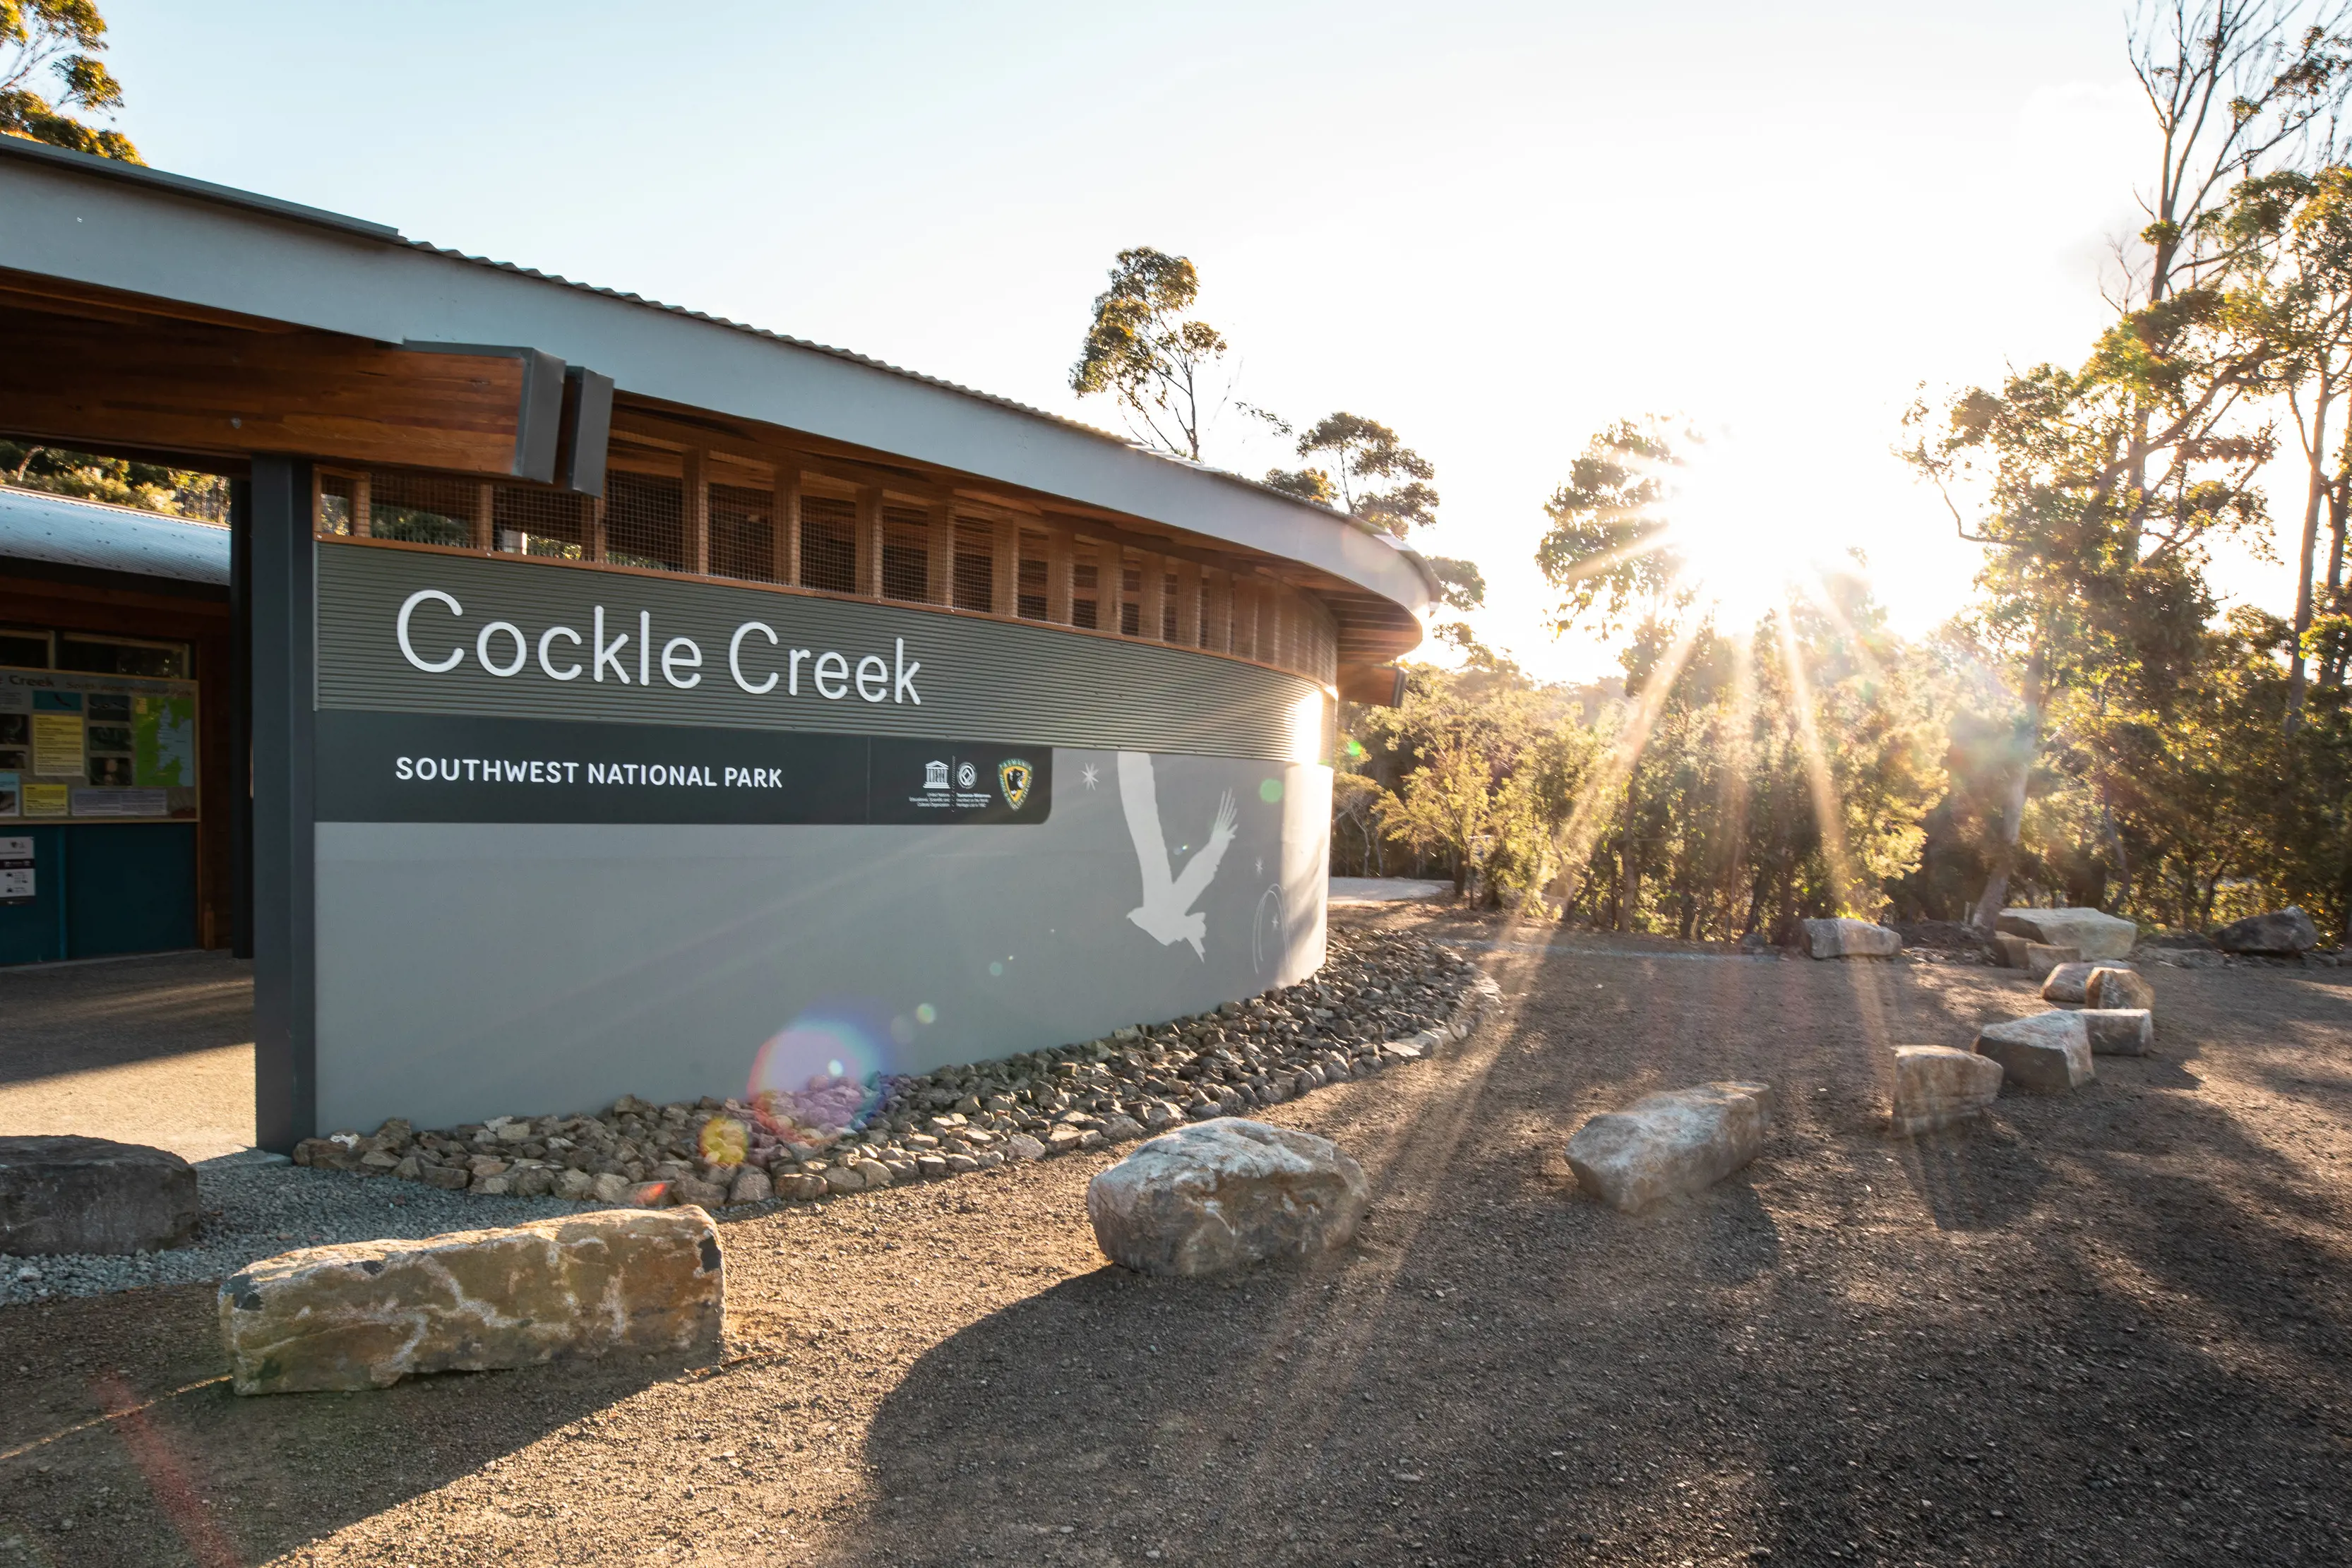 The sun beams over Cockle Creek Vistor Centre, at Southwest National Park.